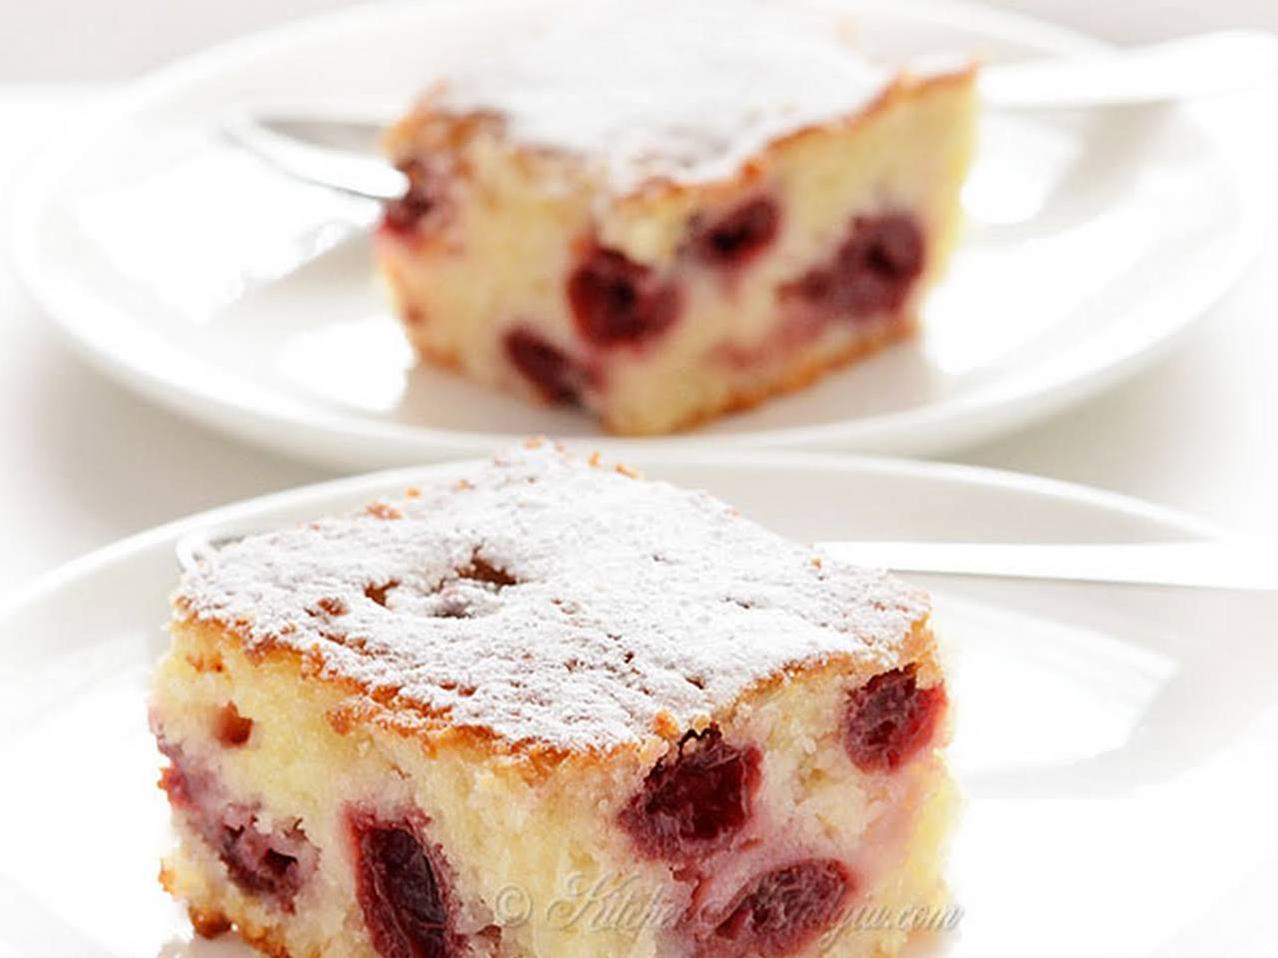  When life gives you sour cherries, make coffee cake!